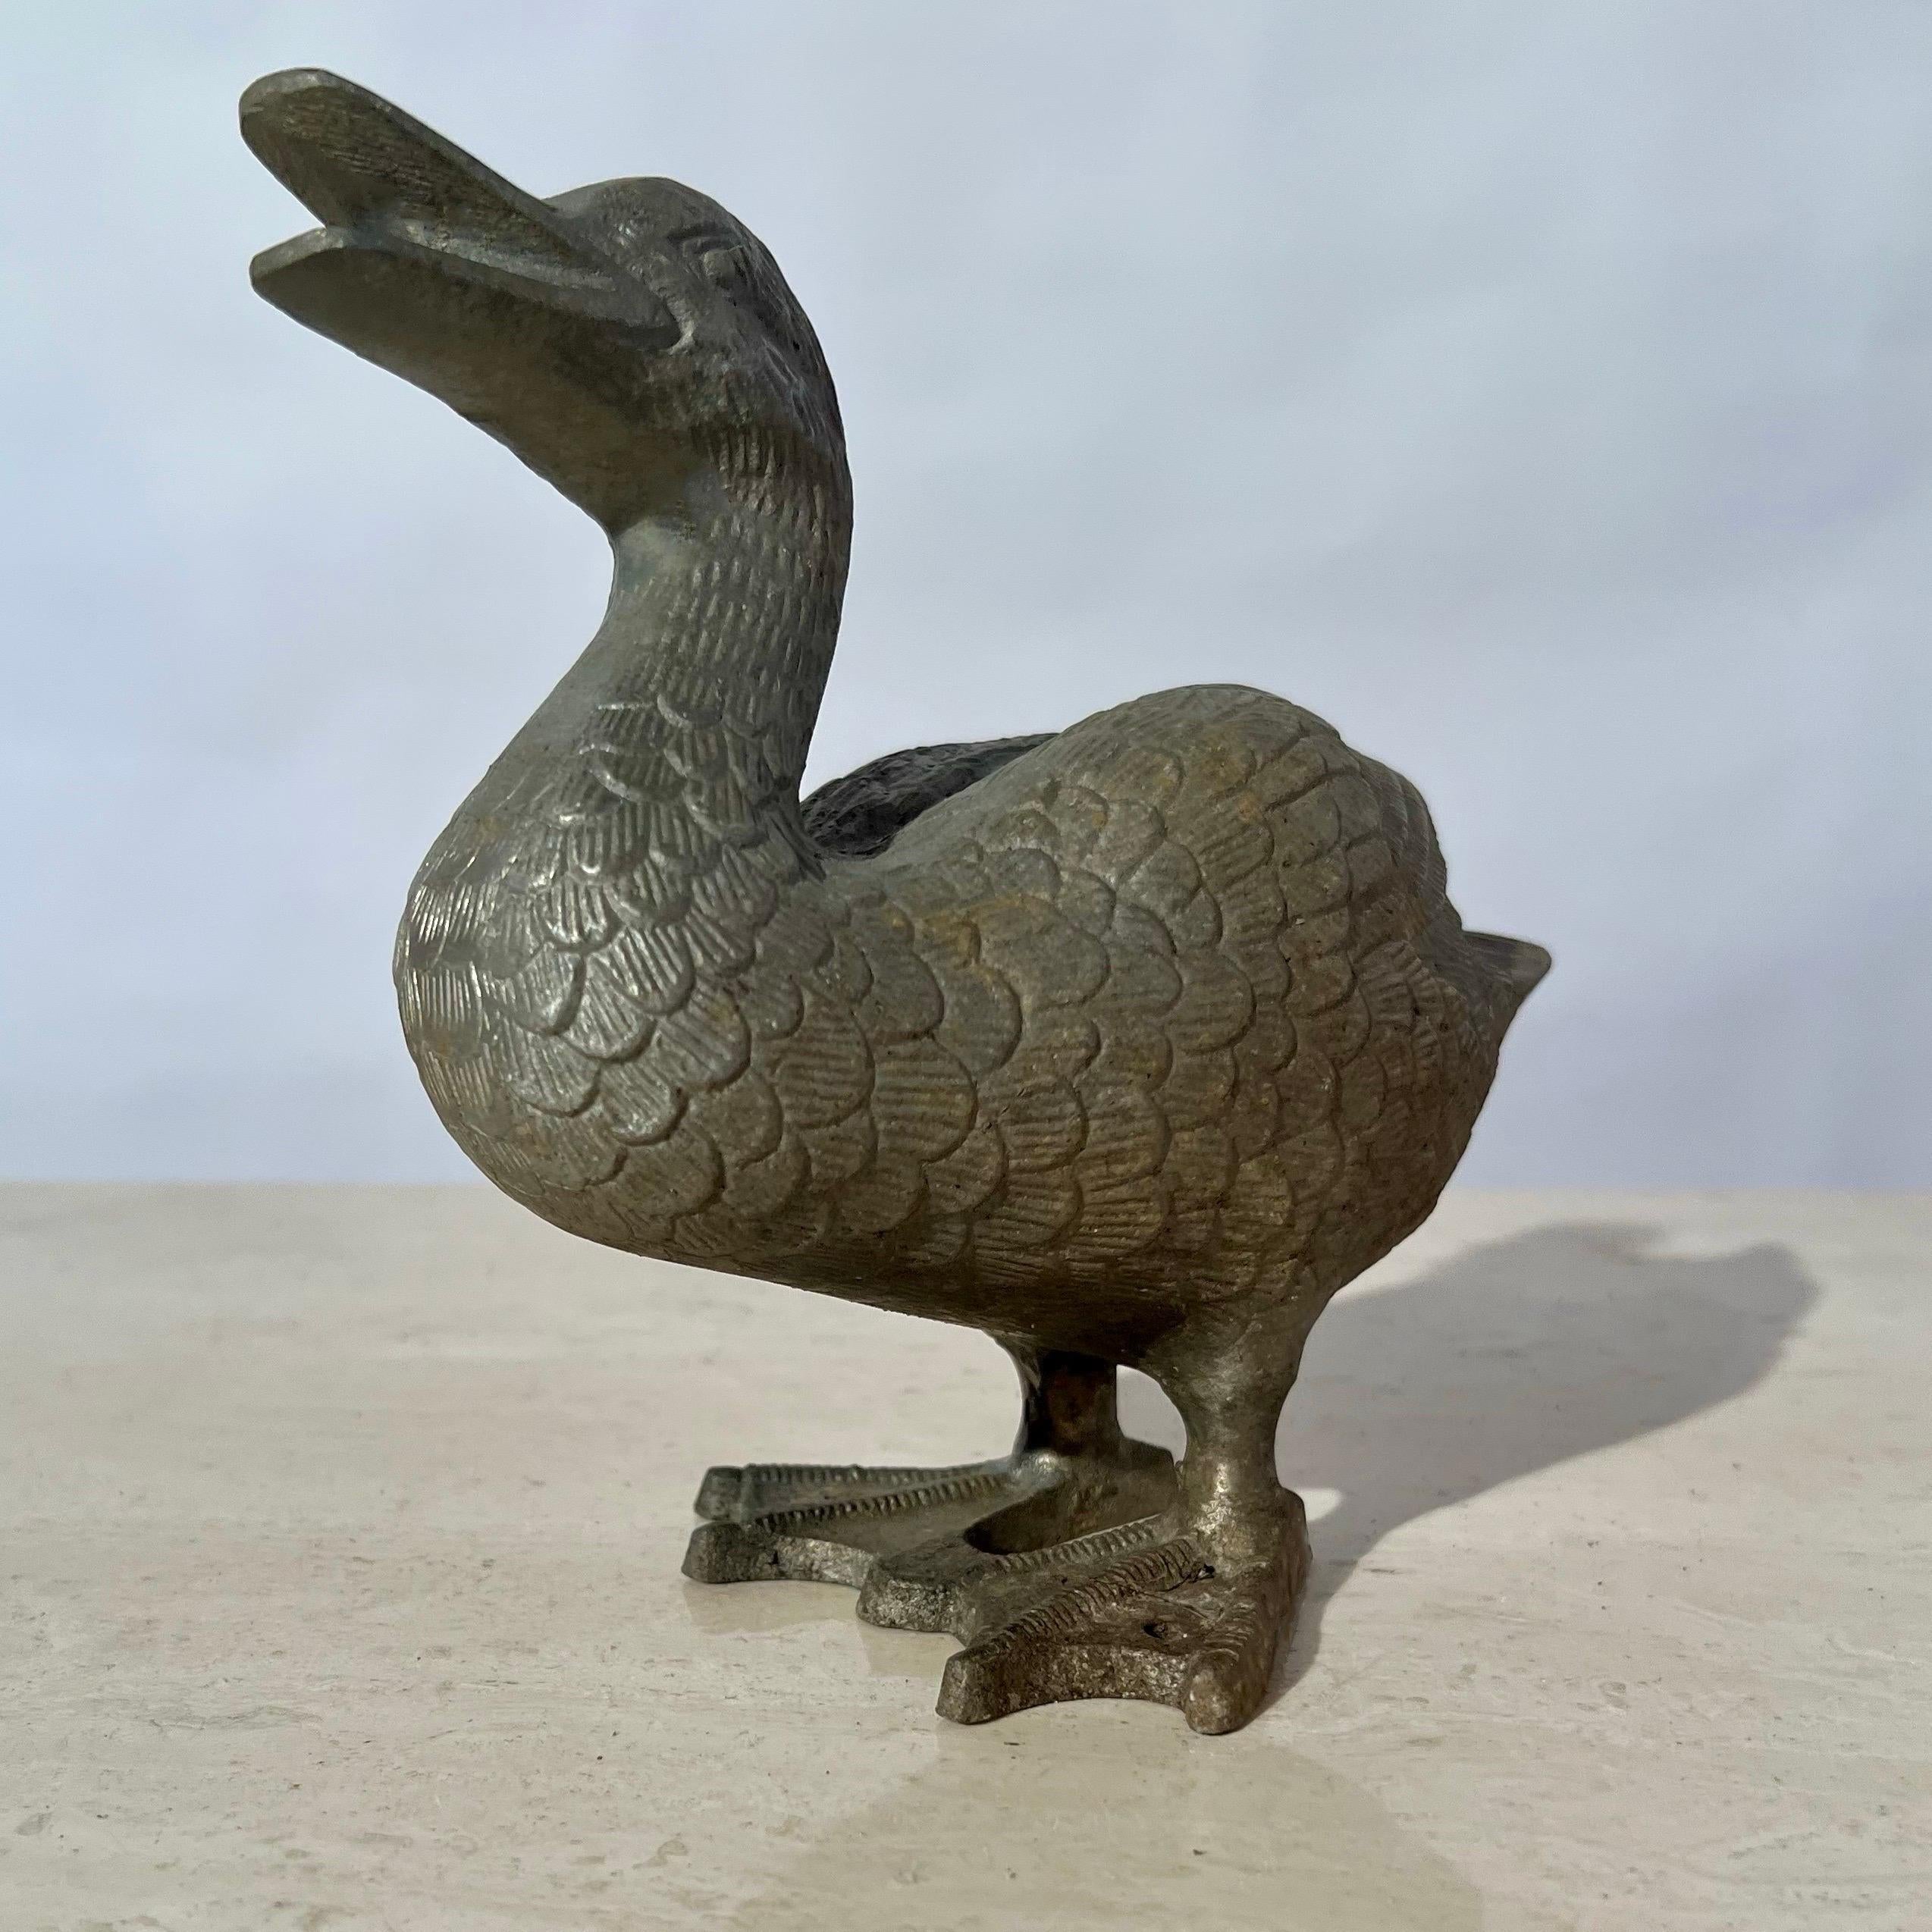 We offer to you this cheerfull addition for your home or garden! In the form of a young duck, his expression is as if he is a very happy fellow and will share his joy freely with you! This whimsical vintage cast metal  sculpture would be equally